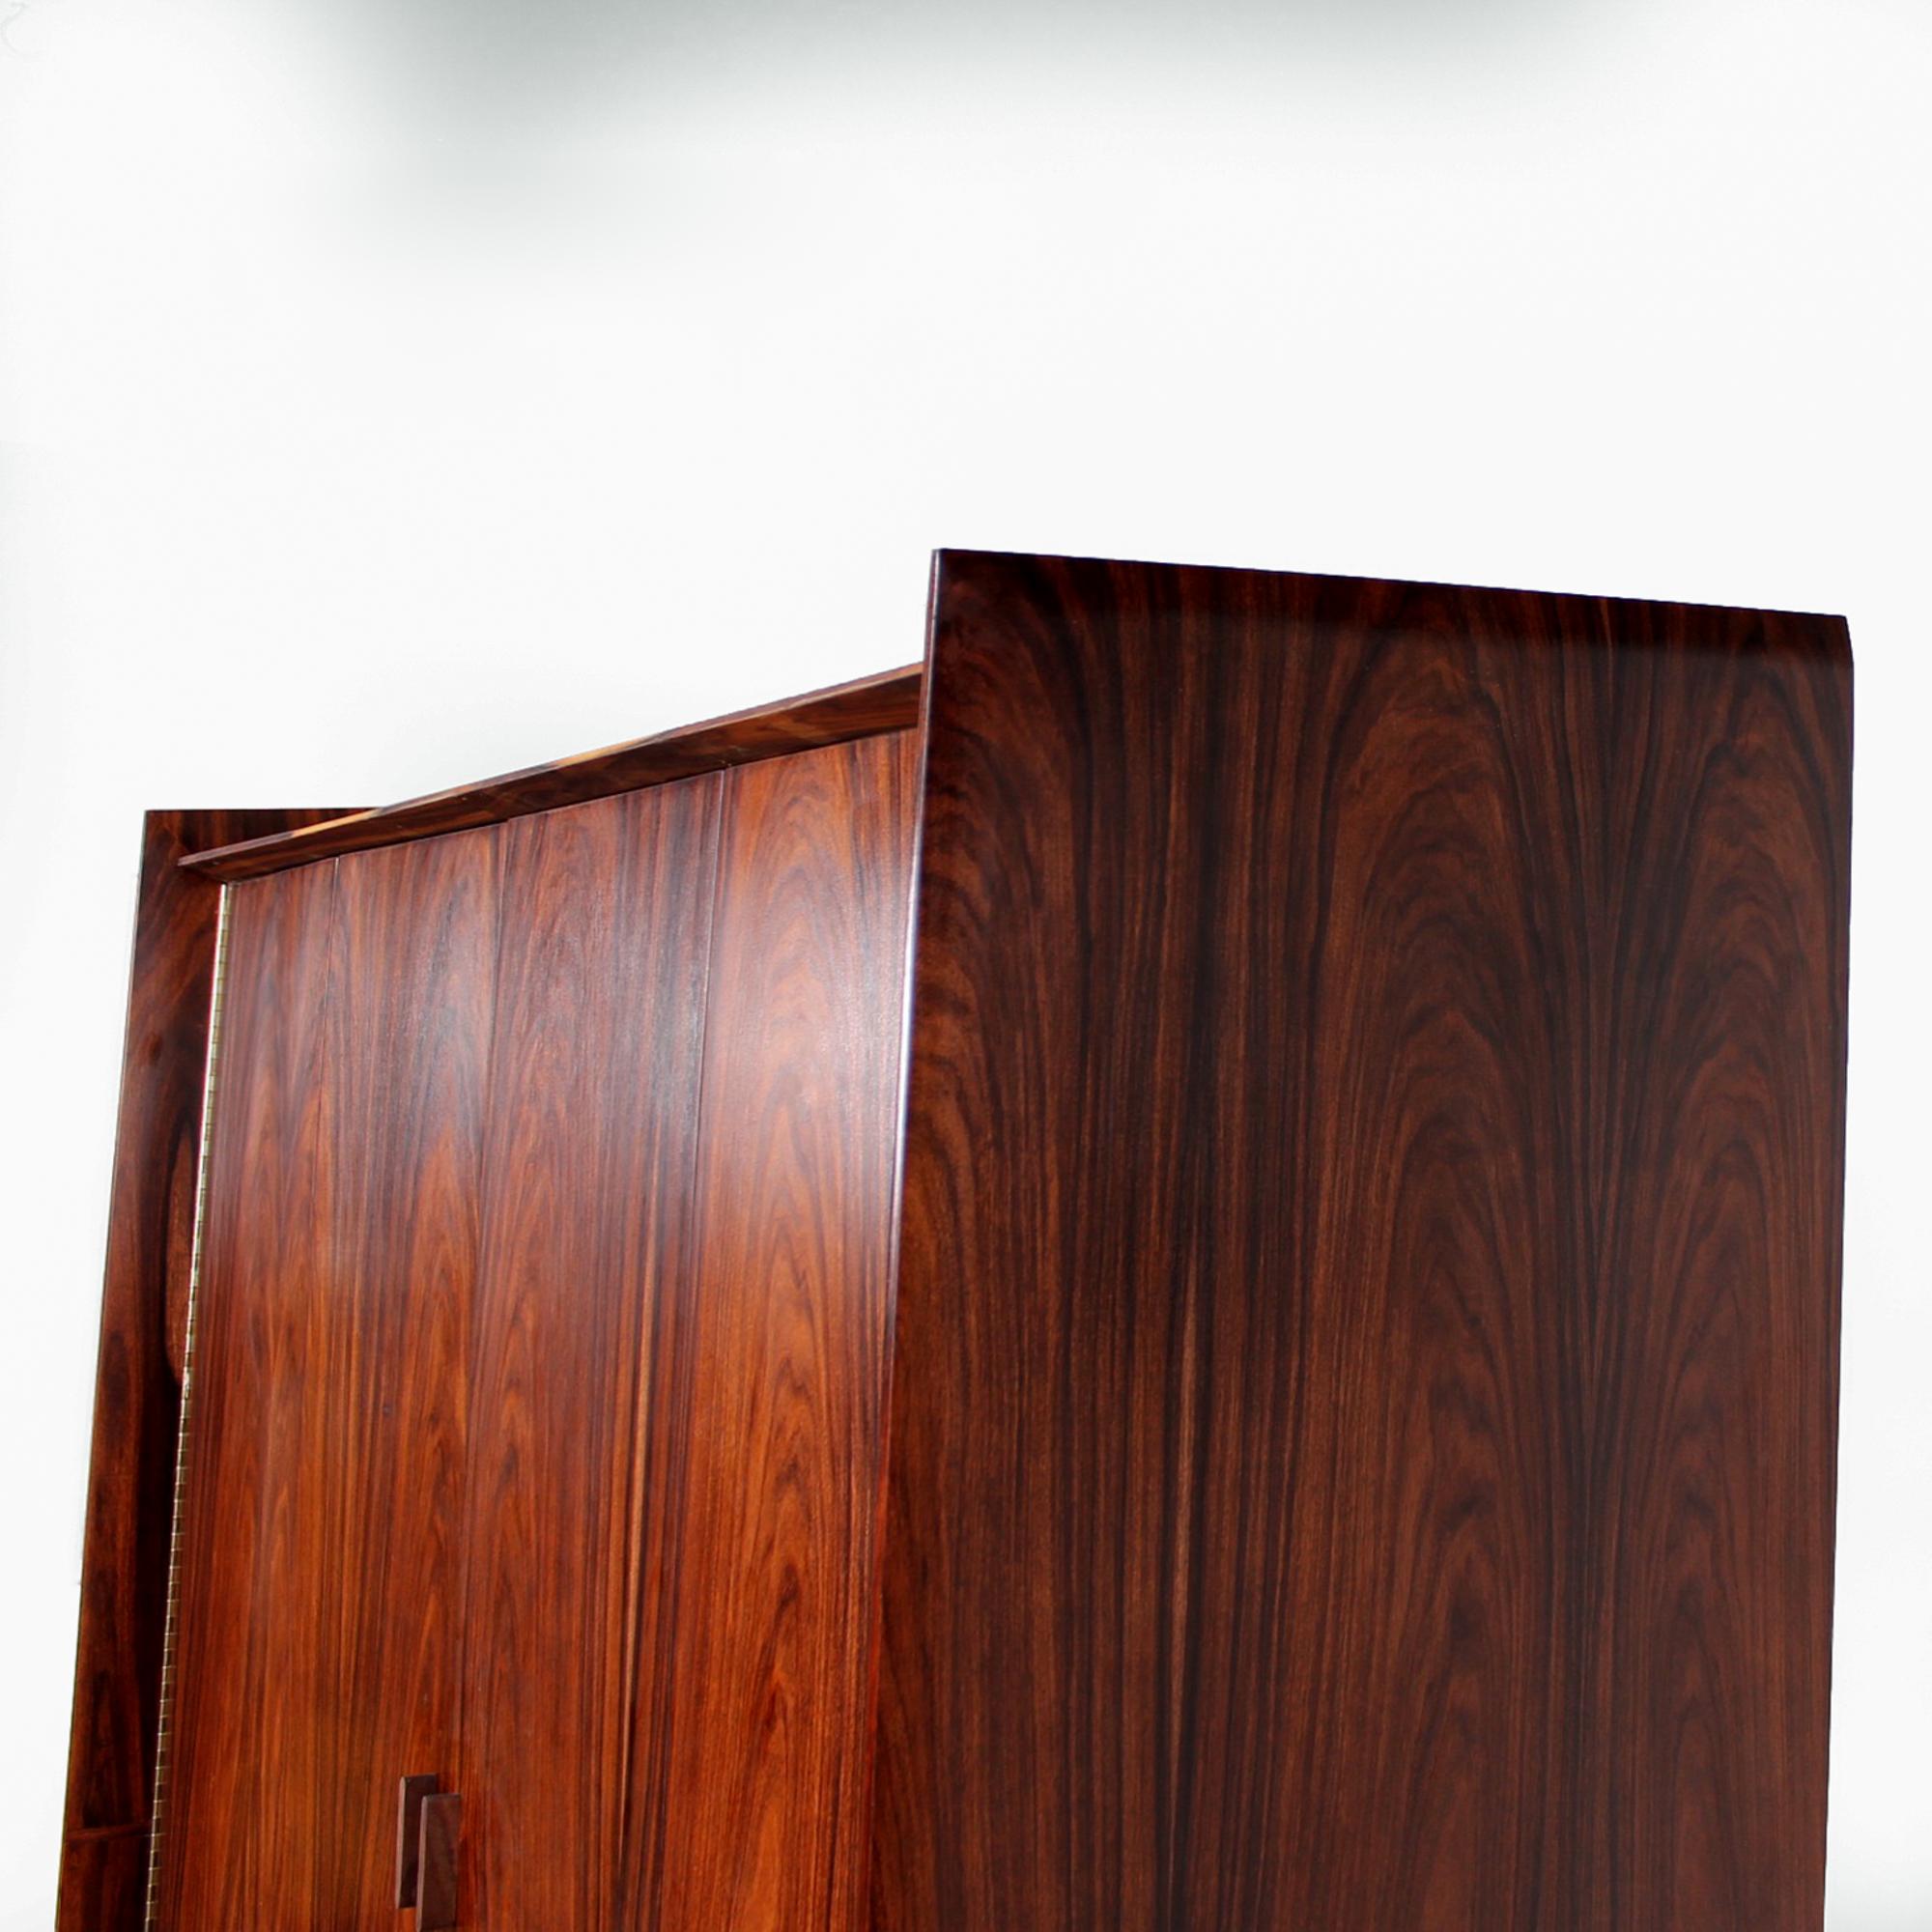 American Magnificent Rosewood Armoire Gentleman's Cabinet by Pablo Romo for Ambianic